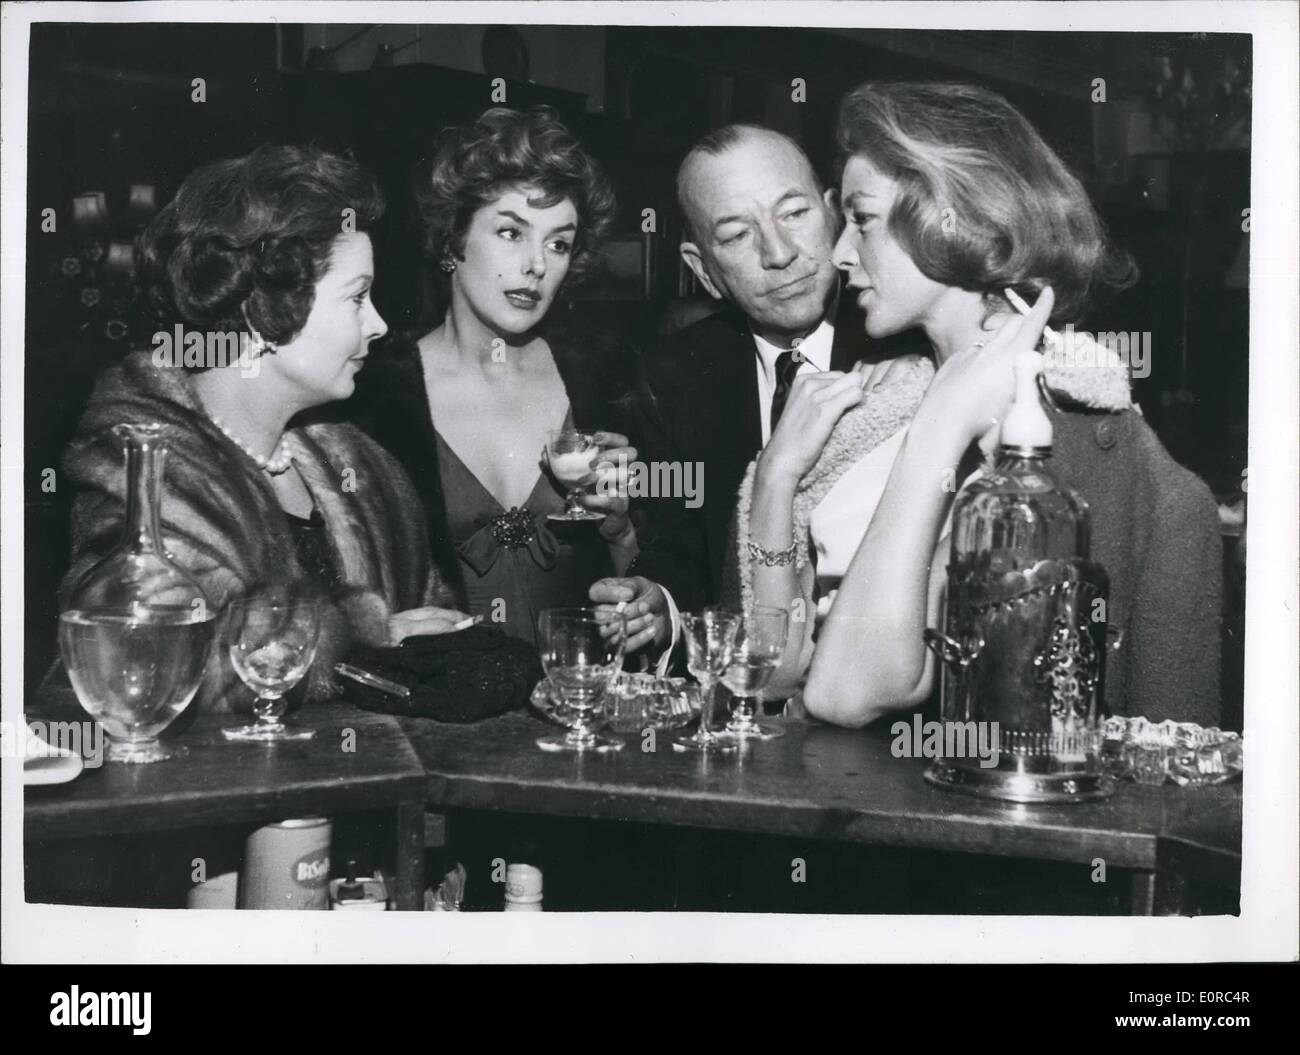 Jan. 01, 1959 - The lucky Squire of London town Noel Coward escorts three fascinating women: Mr. Noel Coward was surely the luckiest man in London last night, when, bearing like a benevolent sultan he escorted three of the world's most fascinatiing women, Kay Kendall, Vivian Leigh and Lauren Bacall, to the St Martin;s Theatre. They went to see ''The grass is greener'' starring their mutual friend, Celia Johnson. The party had been laid on by Vivian Leigh Stock Photo